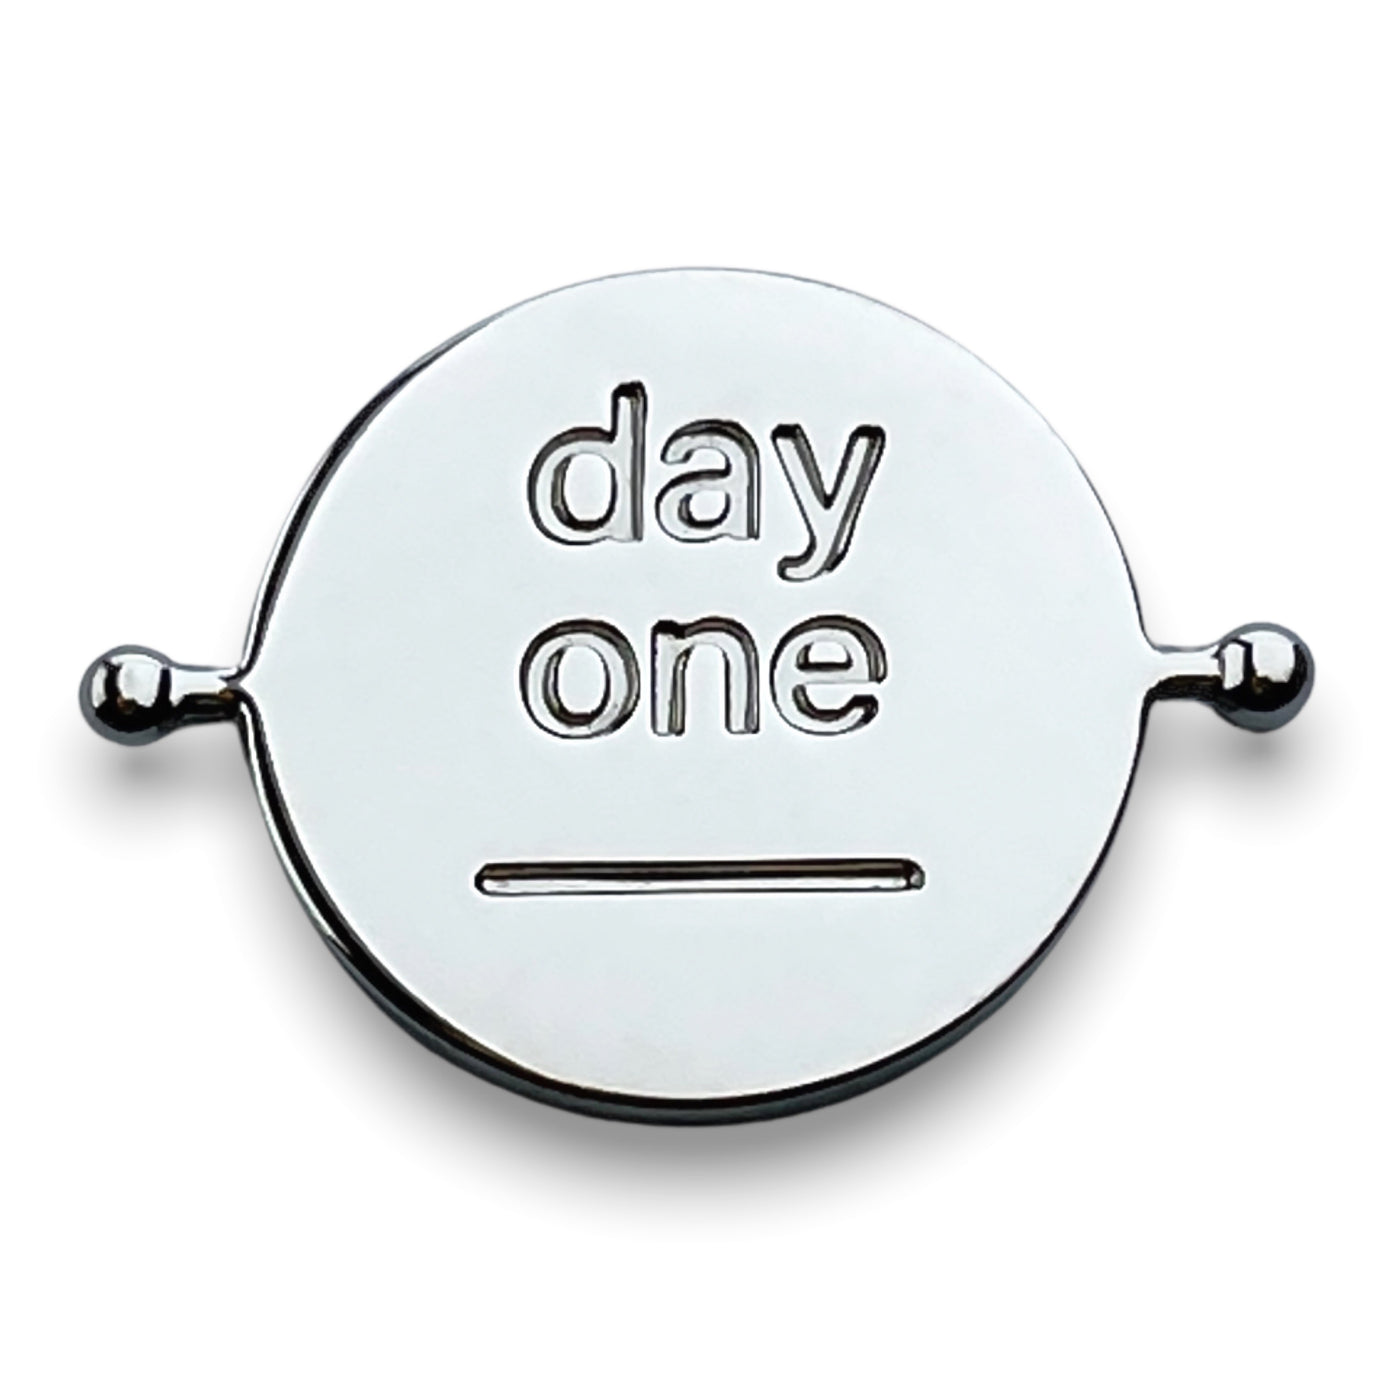 DAY ONE Element (spin to reveal)